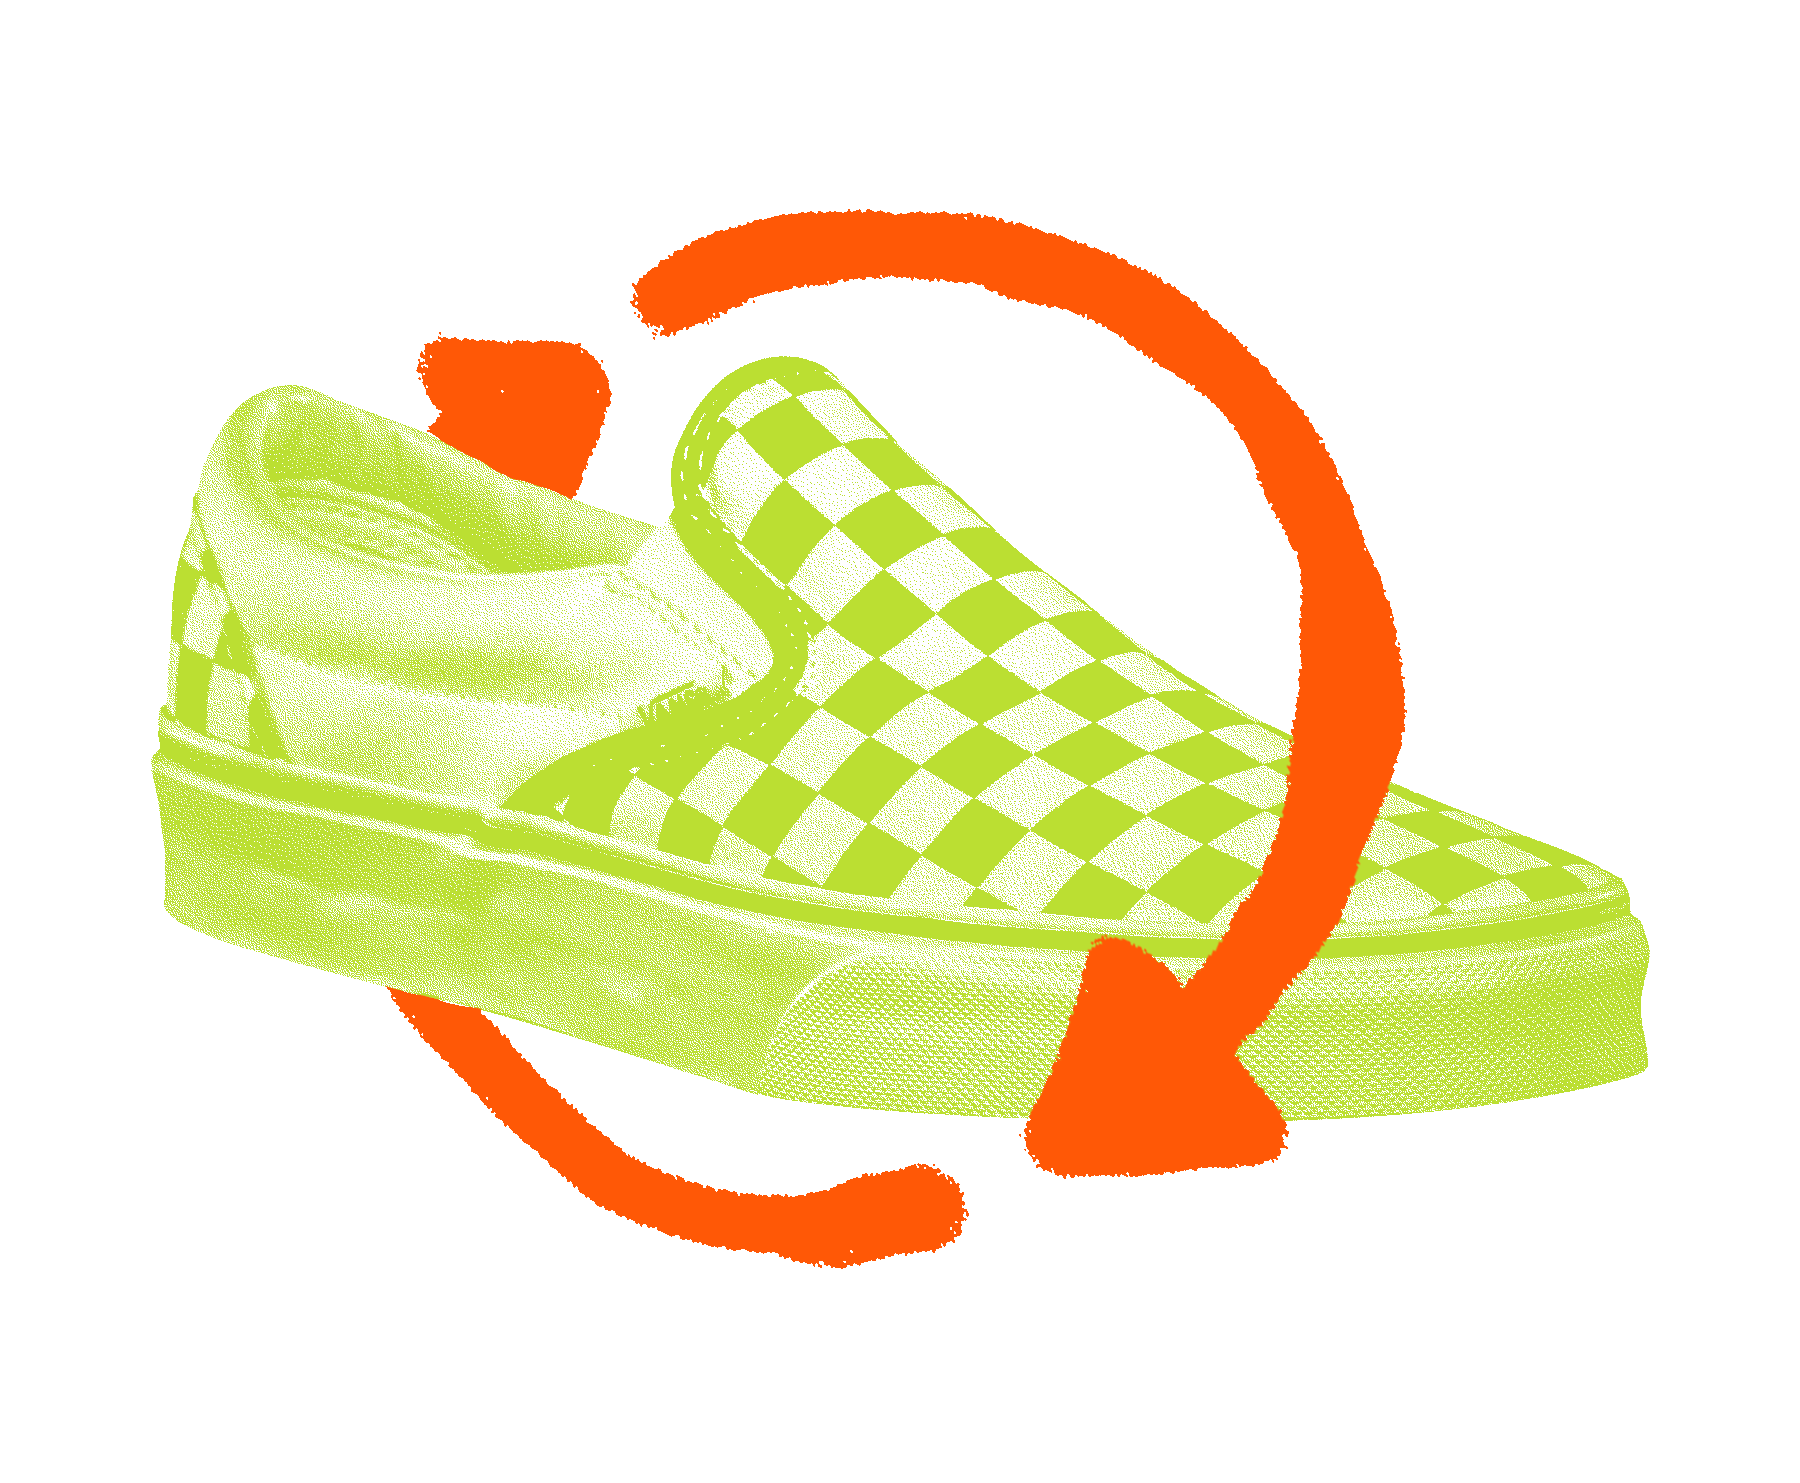 Animated graphic of a shoe with recycling symbol